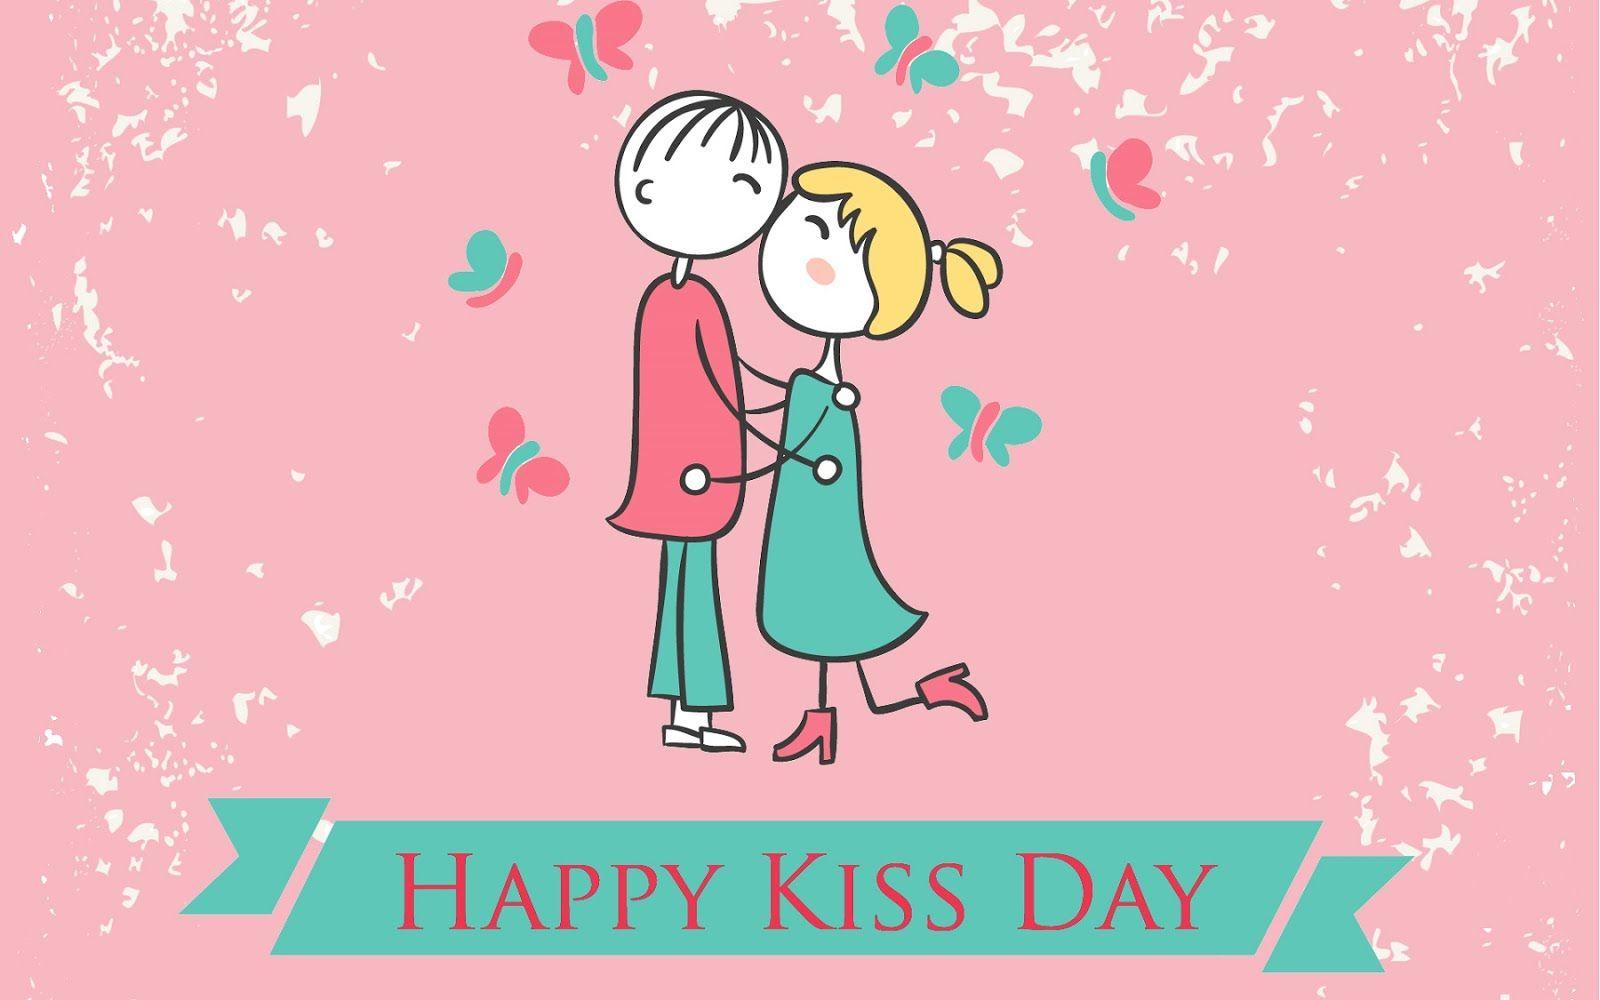 Happy Kiss Day Wishes SMS Quotes Status 2018. GIFs Image